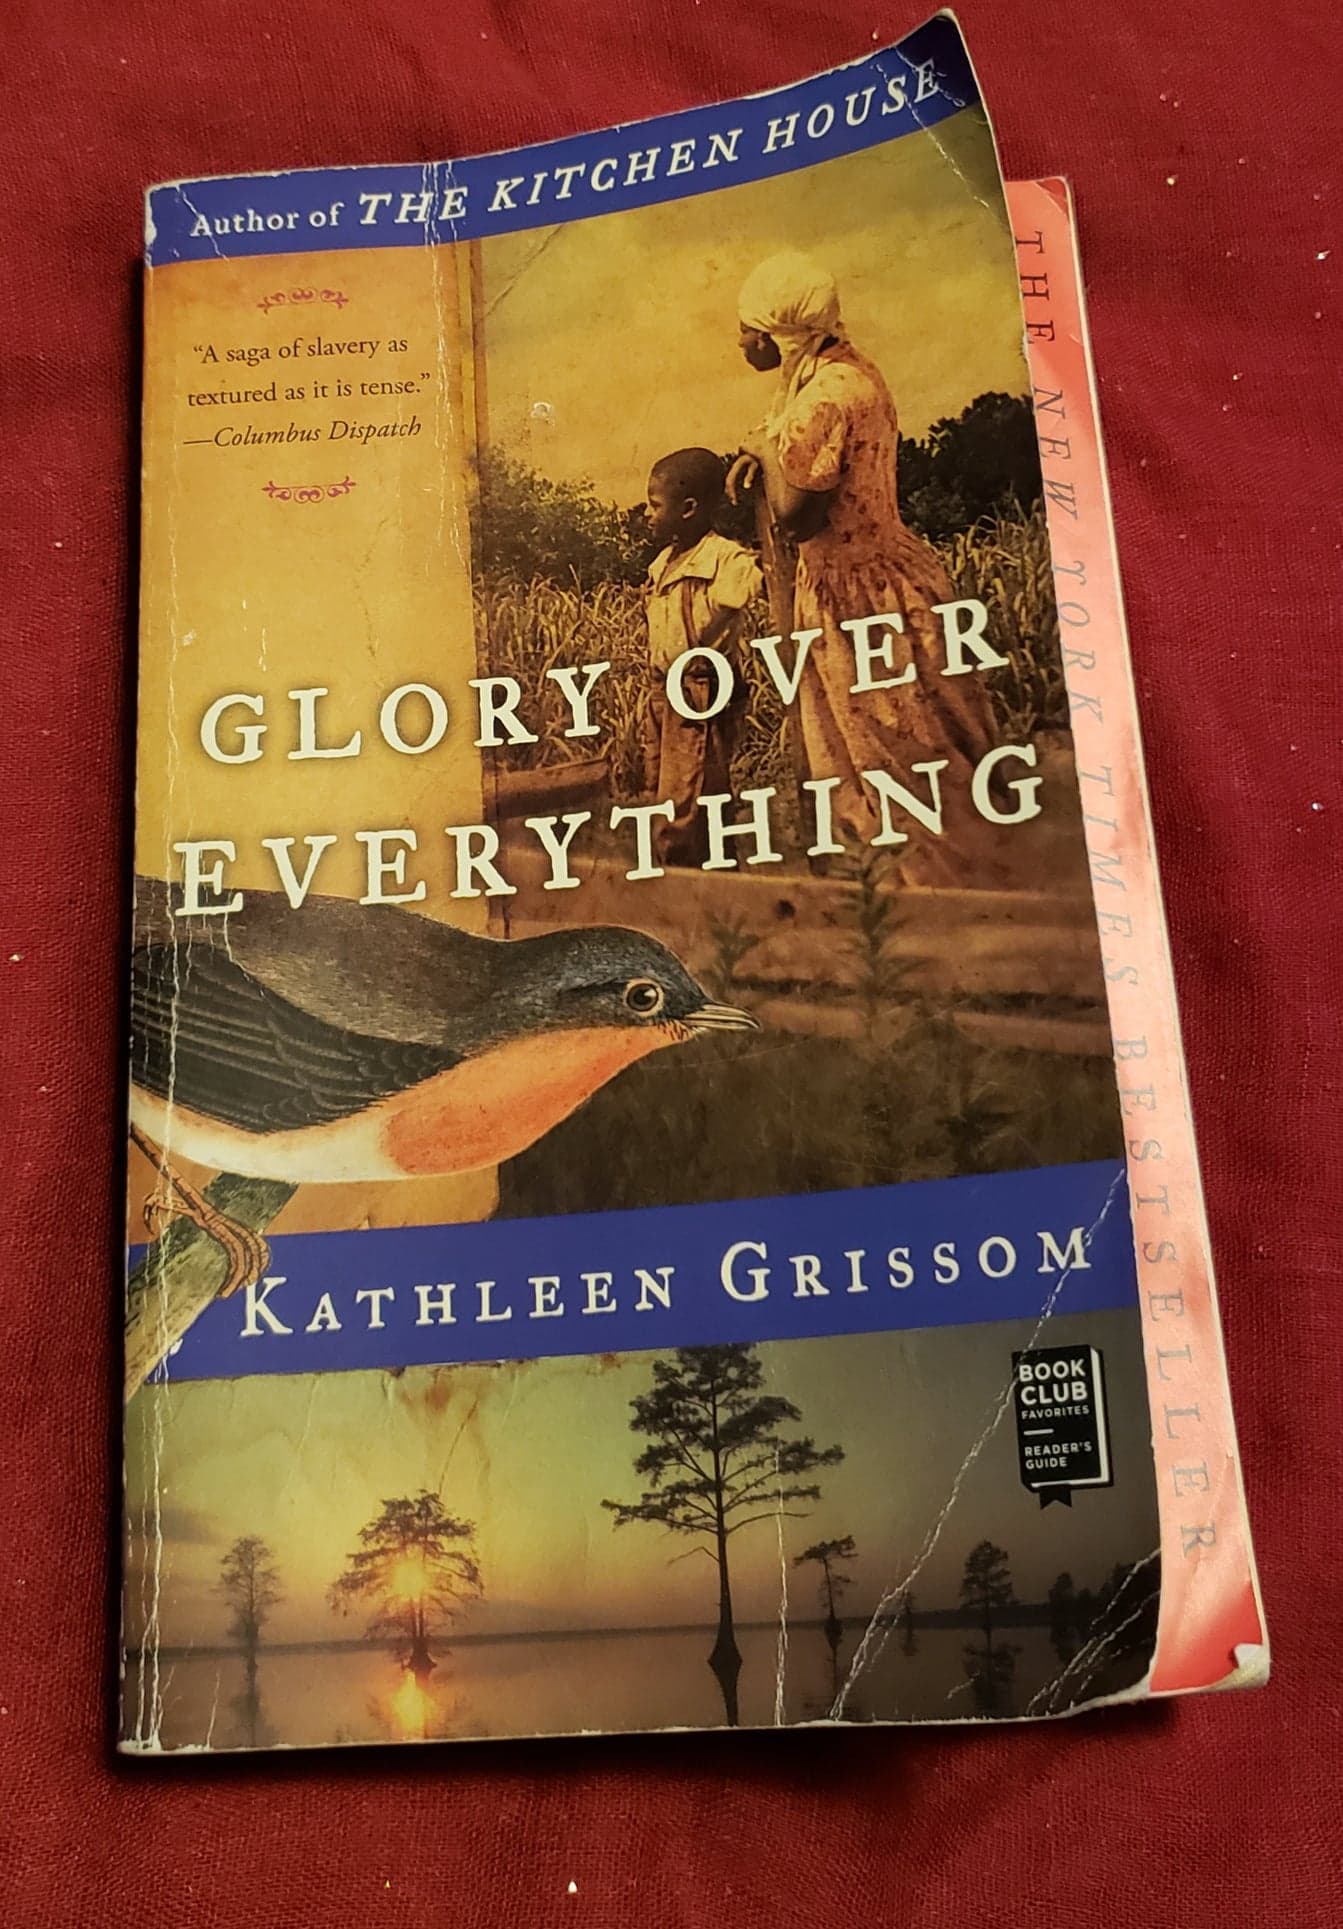 Review: Glory Over Everything